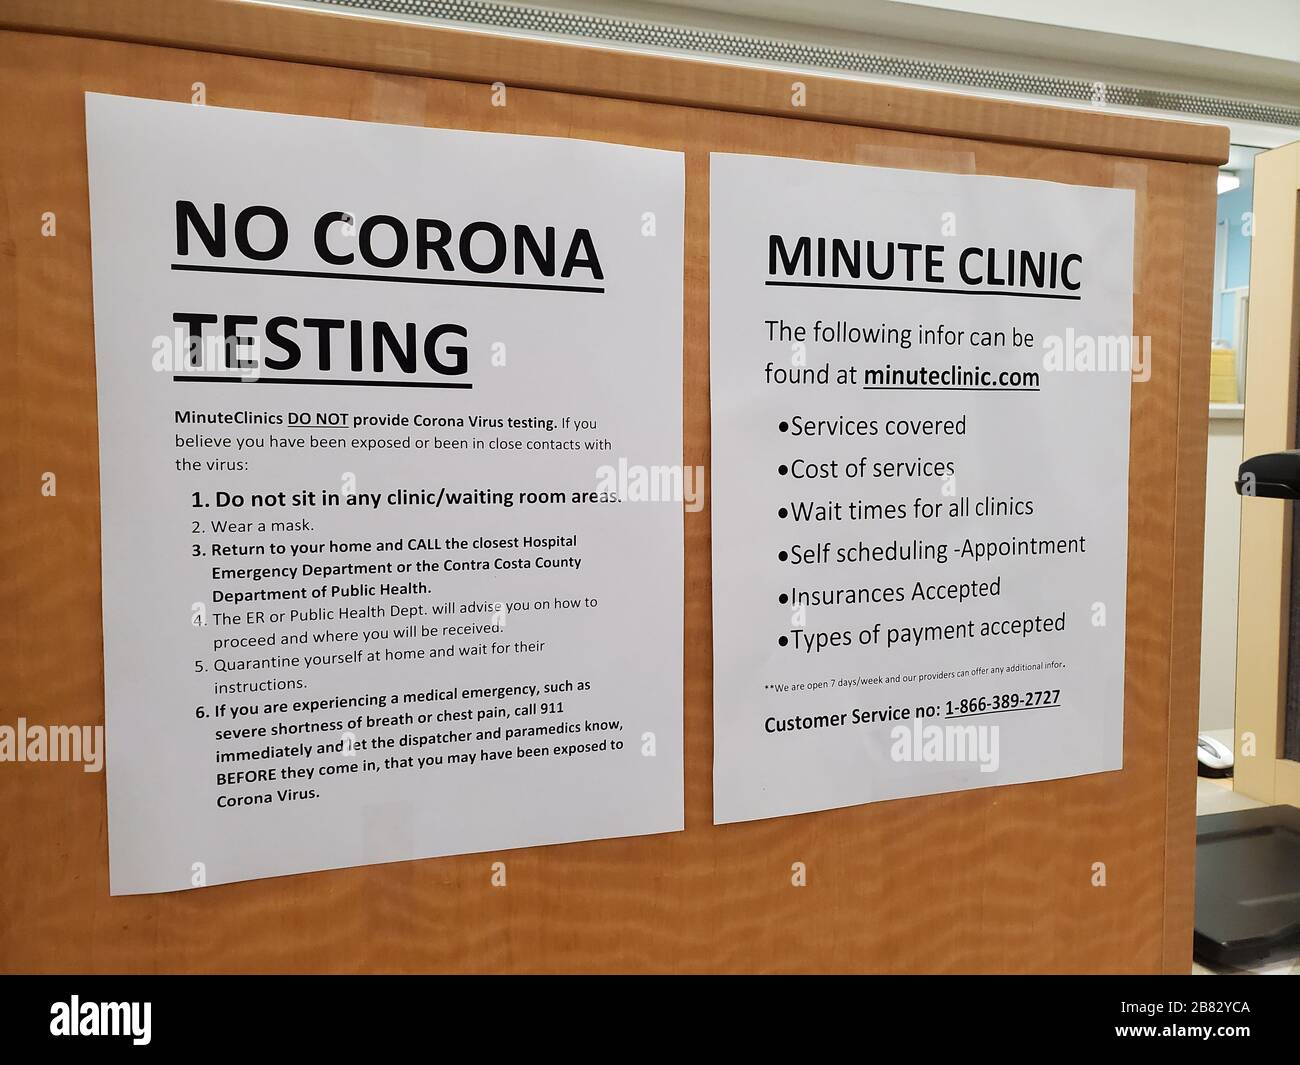 A printed sign reads No Corona Testing, indicating that coronavirus tests are not available, at a pharmacy in Contra Costa County, San Ramon, California during an outbreak of the COVID-19 coronavirus, March 16, 2020. () Stock Photo